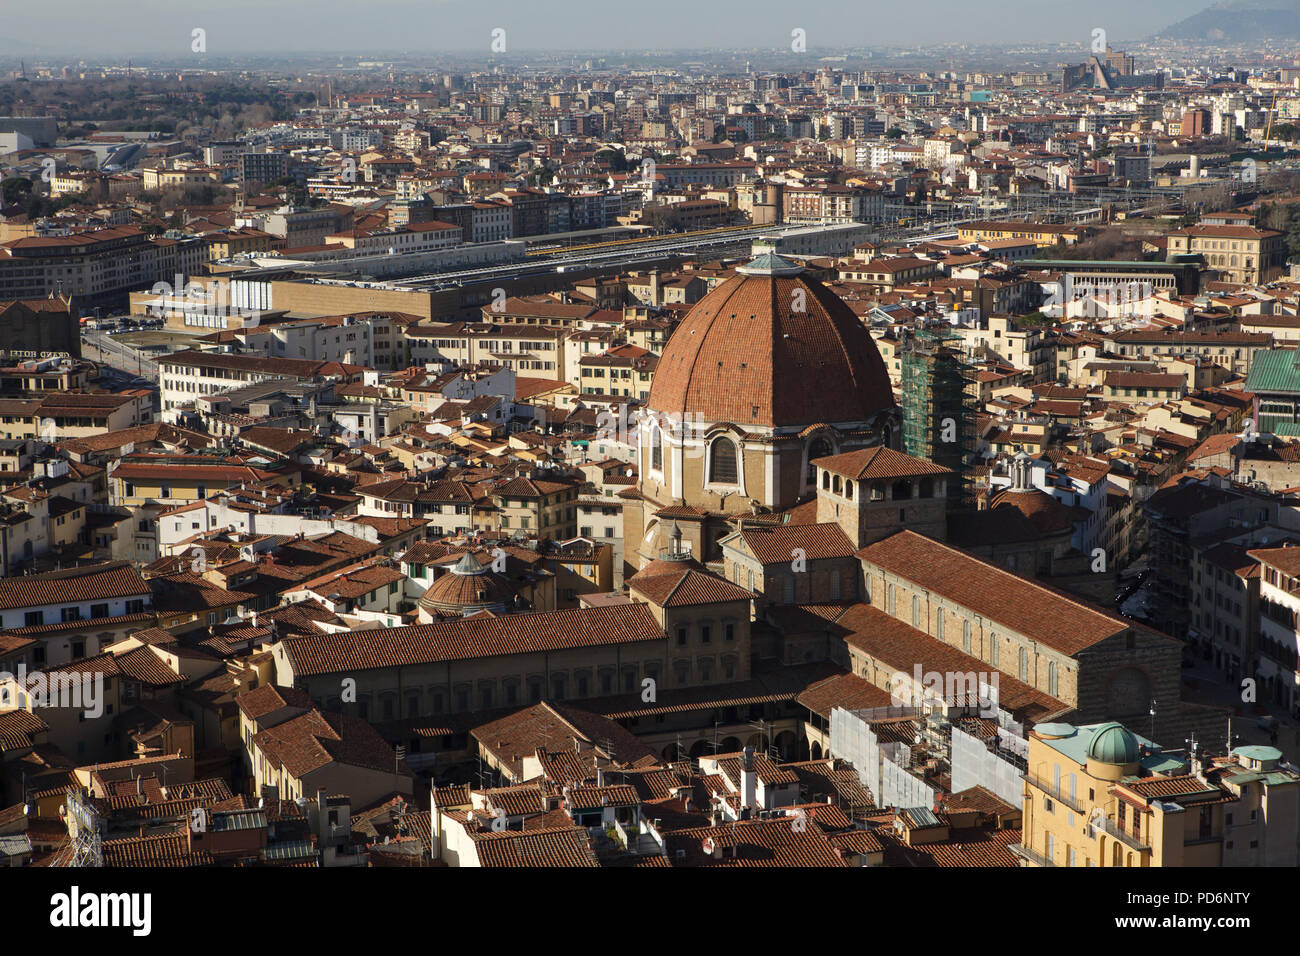 Basilica di San Lorenzo (Basilica of St Lawrence) and the dome of the Cappella dei Principi (Chapel of the Princes) rising over the tiled roofs of the Florence downtown pictured from the dome of the Florence Cathedral (Duomo di Firenze) in Florence, Tuscany, Italy. Santa Maria Novella railway station is seen in the background. The Laurentian Library (Biblioteca Medicea Laurenziana) is seen in the foreground left from the dome and the basilica. Stock Photo